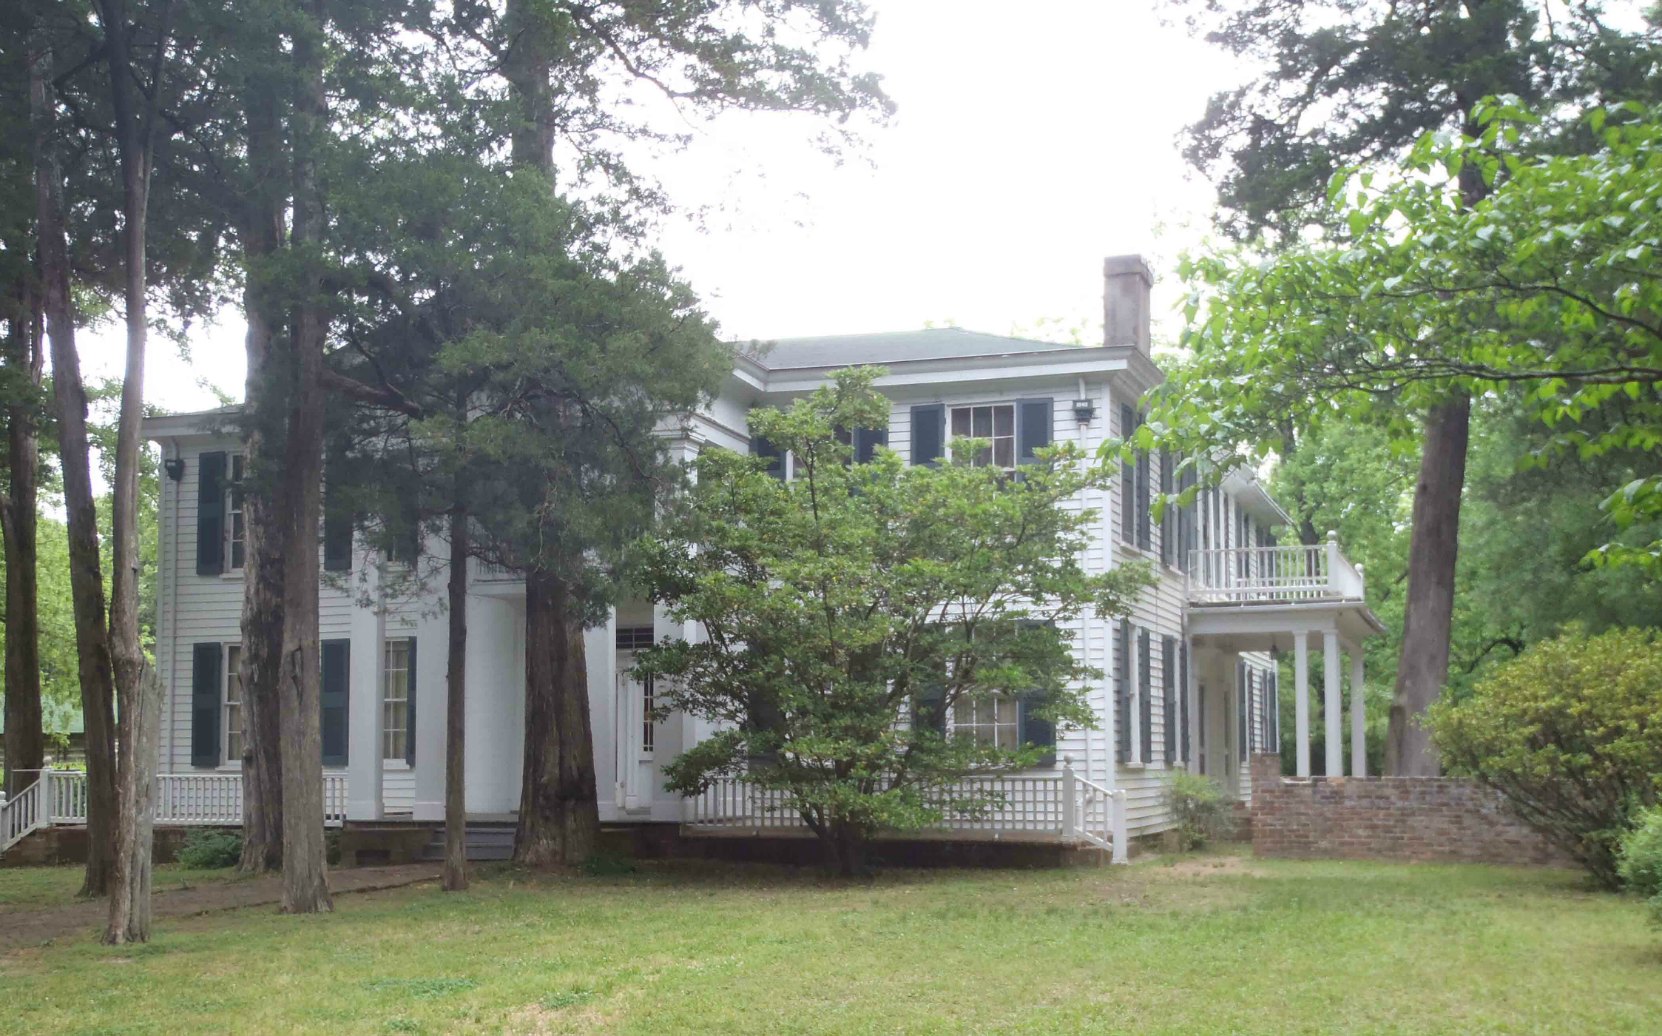 Rowan Oak, William Faulkner's home from 1930 until his death in 1962.